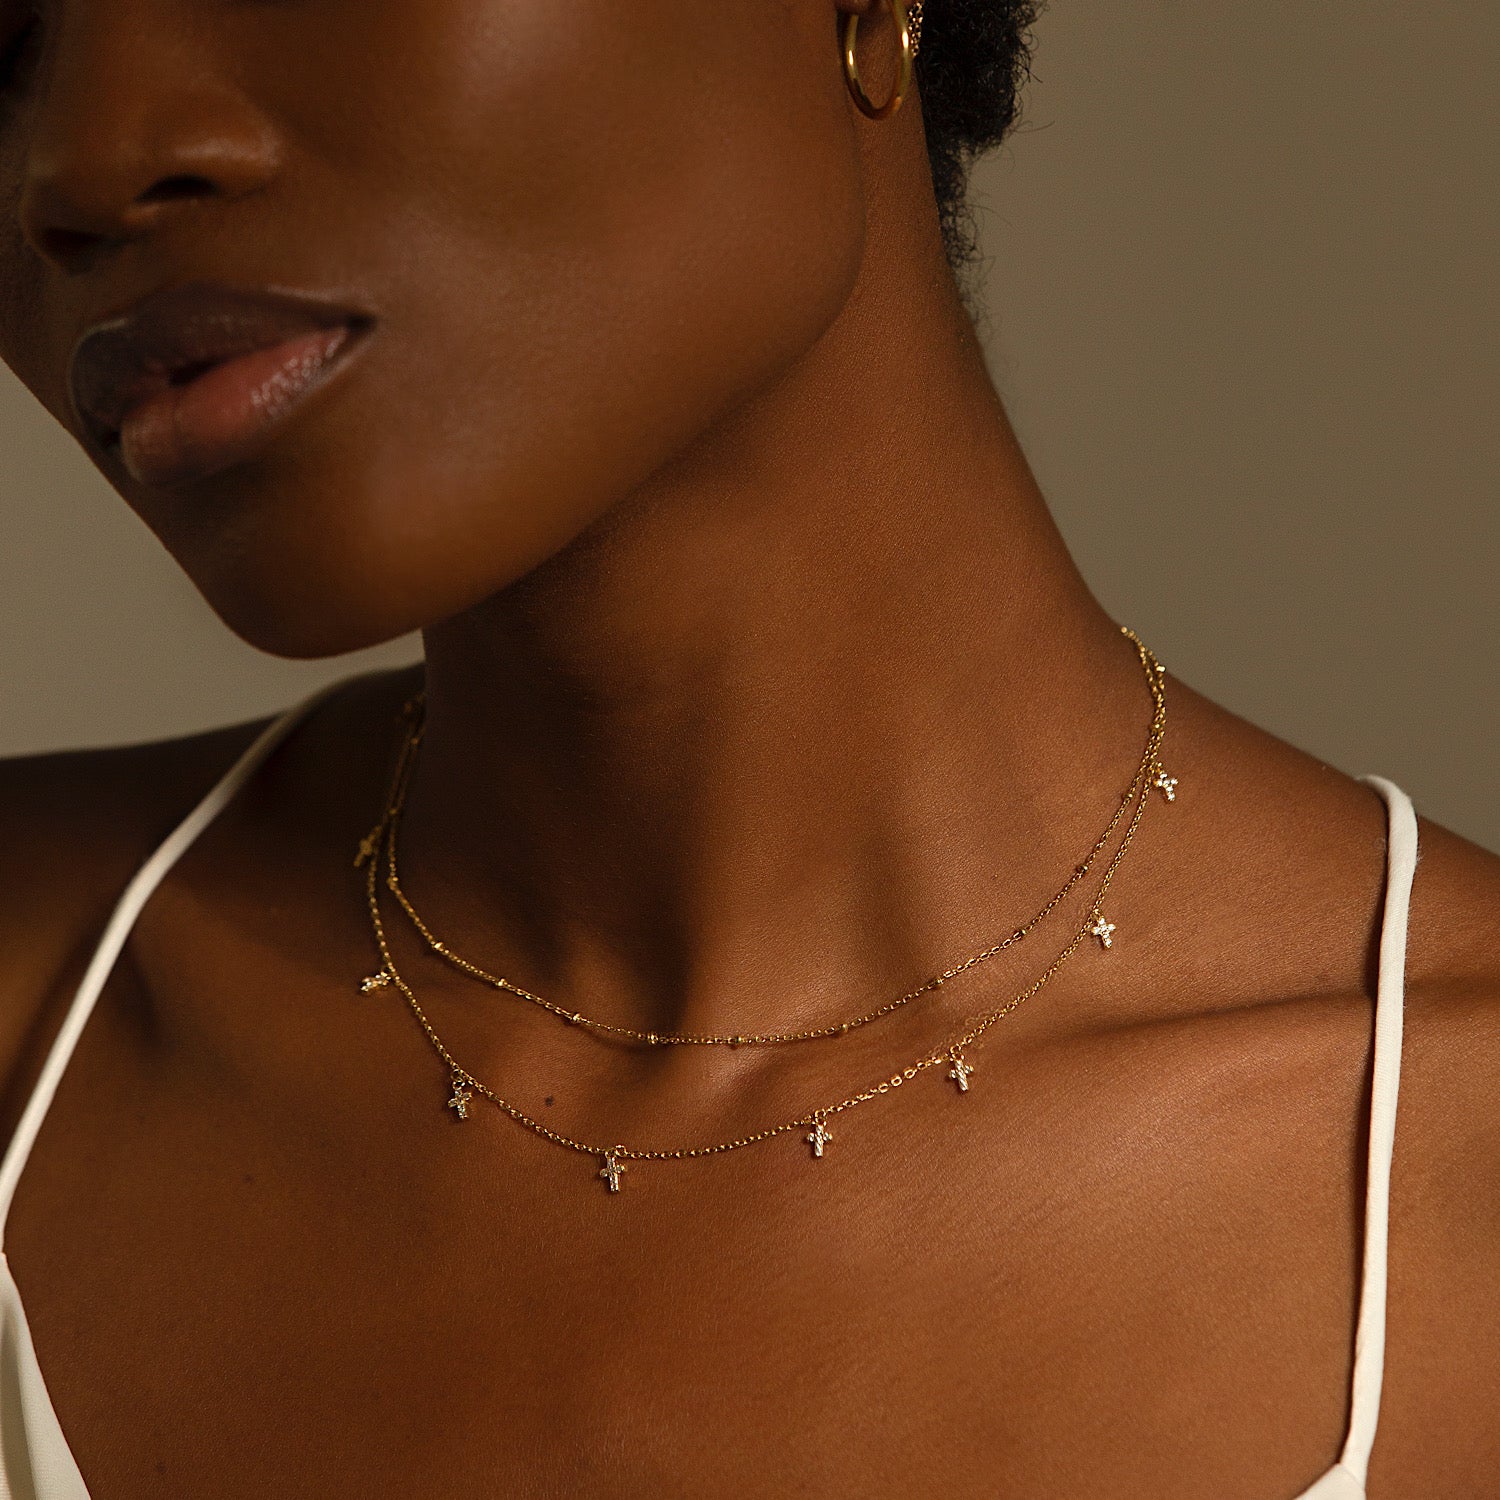 Amyo Gold Layered Necklace Set, Dangle Cross Necklace Gold Vermeil / Neck Circumference Under 15in